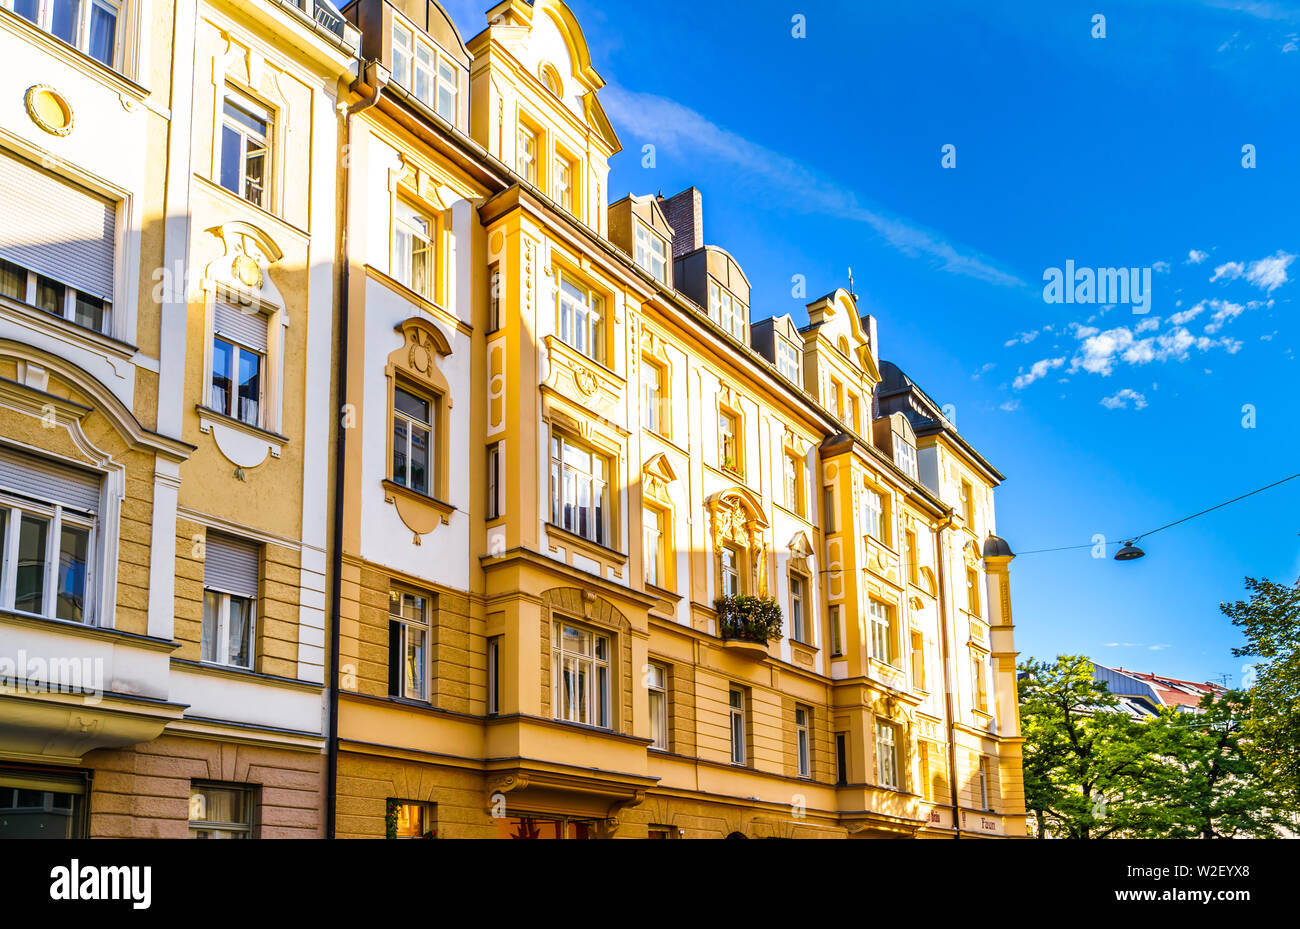 View on old residential buildings in Munich, Germany Stock Photo